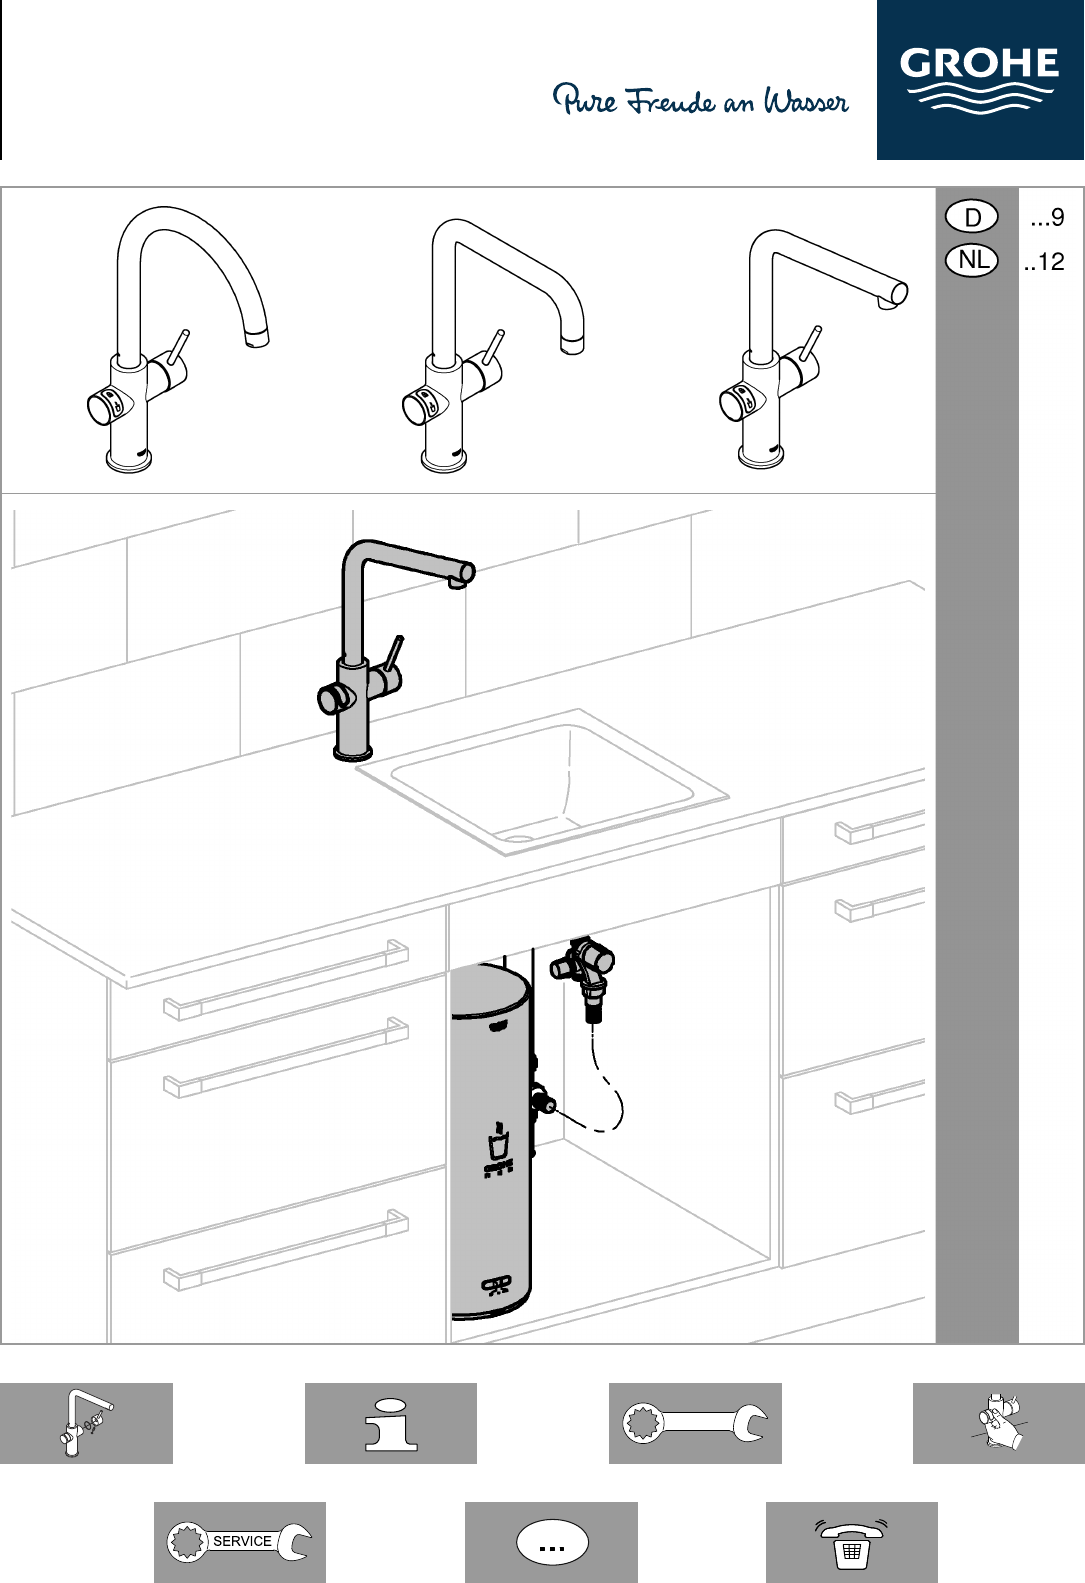 Manual Grohe Red (page of 16) (German, Dutch)